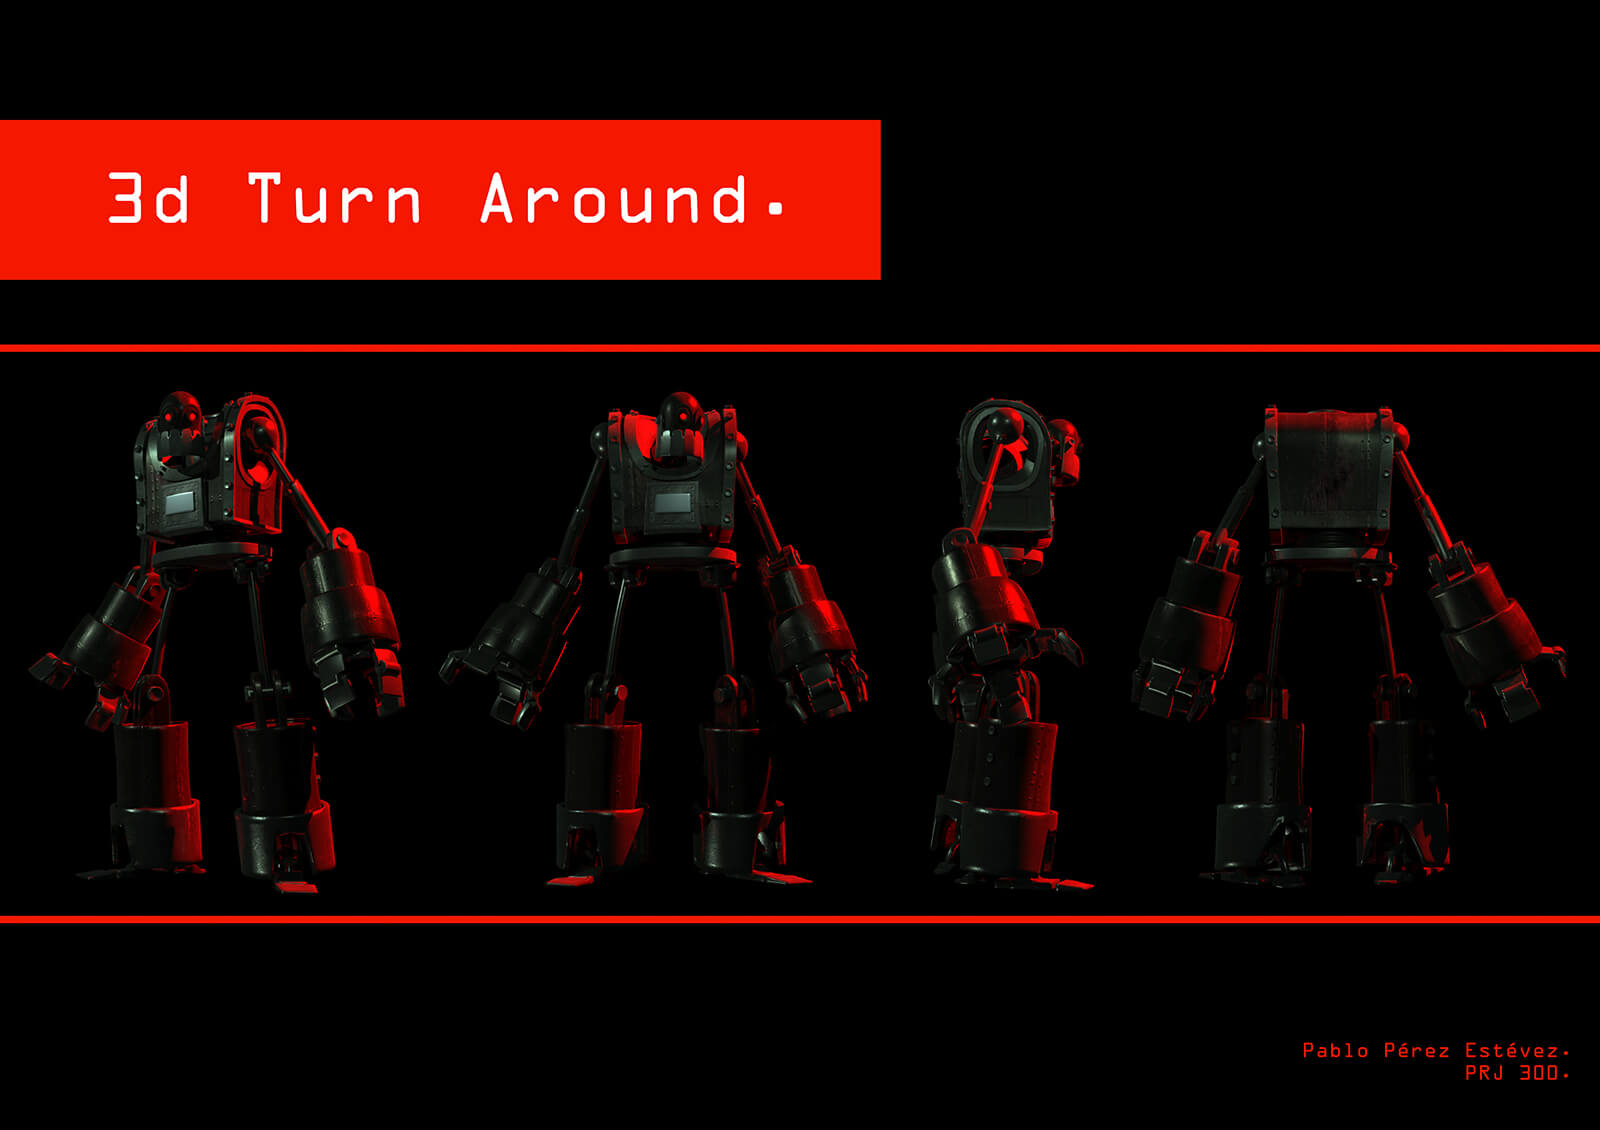 3D turnaround slide for the film Core depicting a large metallic robot from different angles